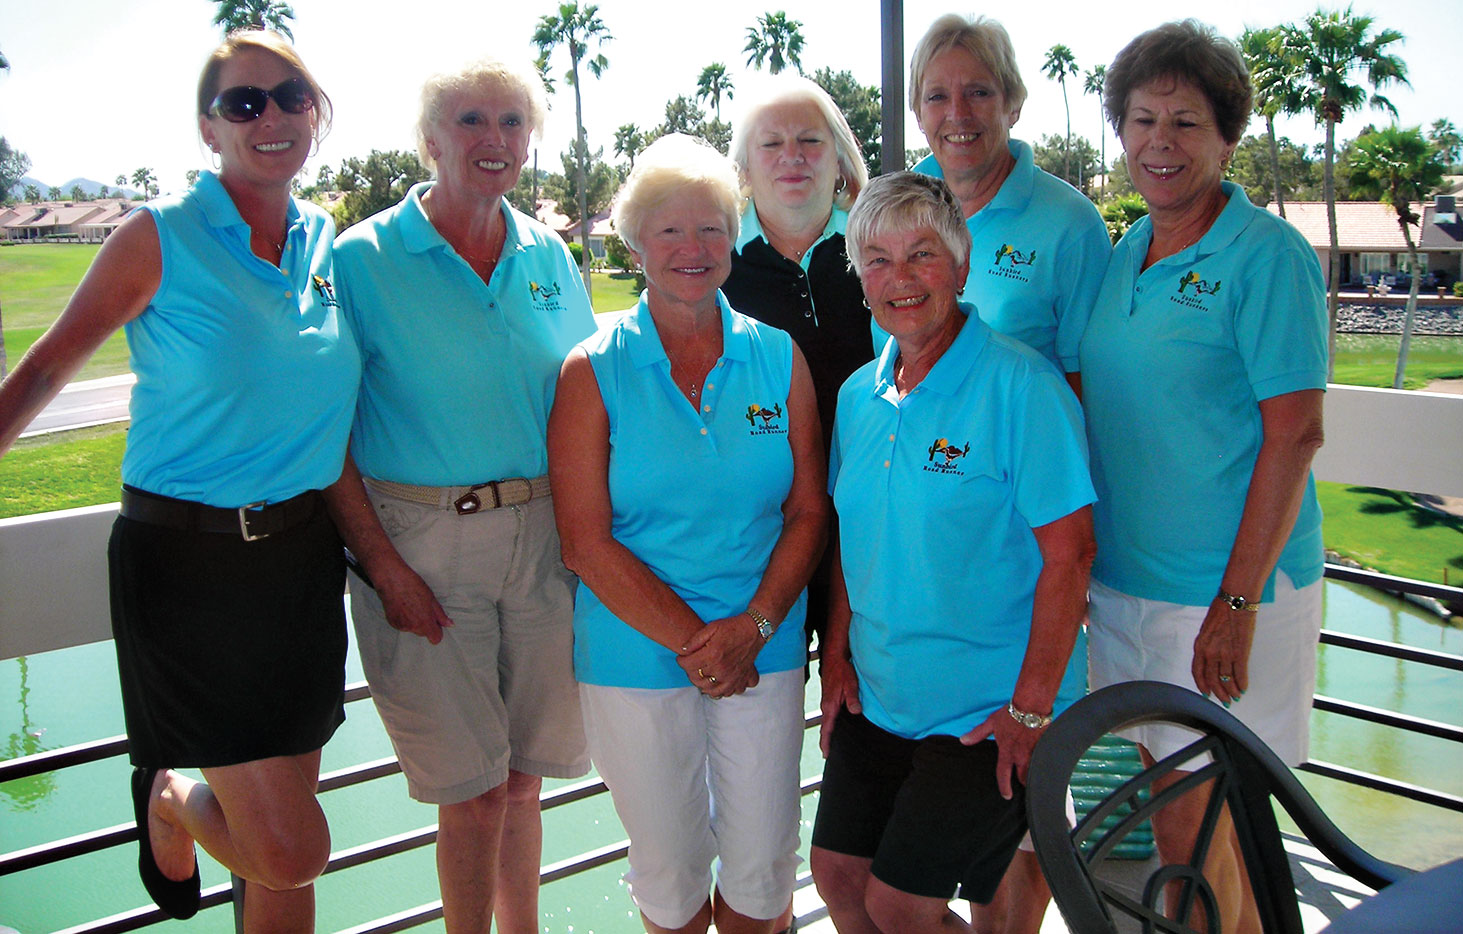 Roadrunners Tournament Committee (left to right) Tammy Bachofner, Connie Dreyer, Shirley Hunt, Dee Lee, MaryLou Trautmann, Linda DePalma and Jan Griffin